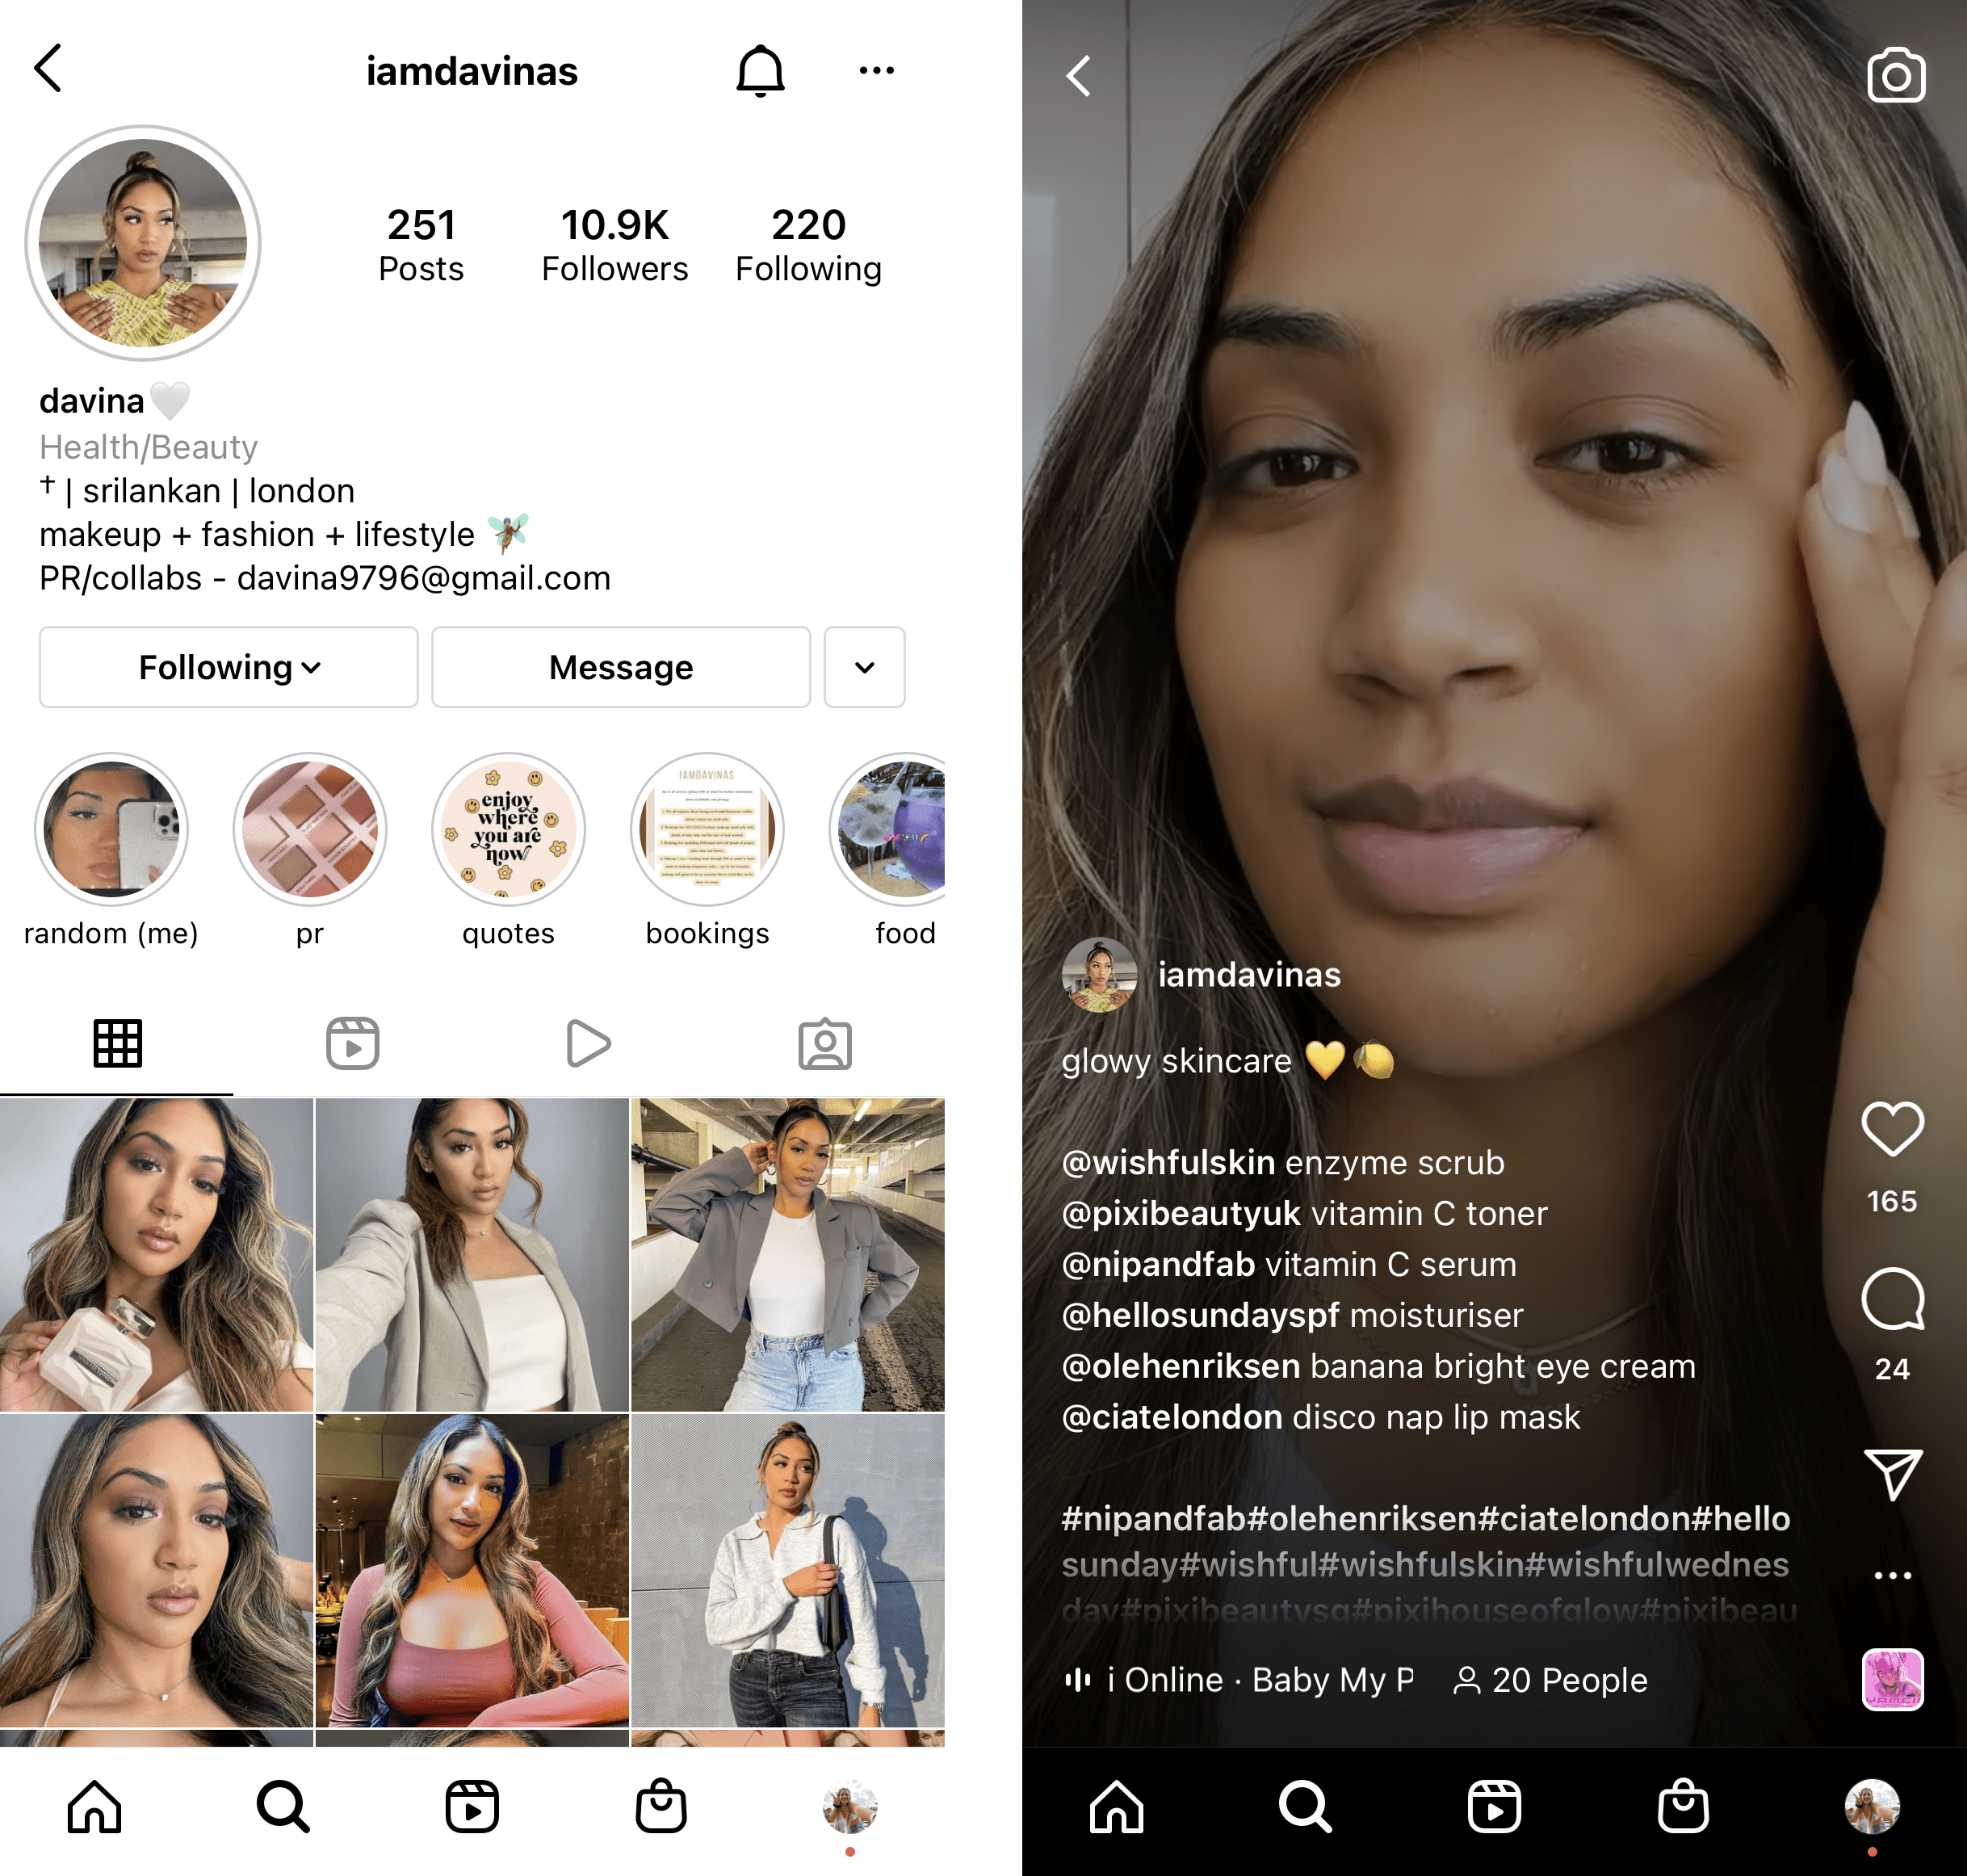 Micro Influencer–This shows two screenshots of London-based makeup, fashion, and lifestyle micro influencer, Davina. One shows her Instagram profile and one shows a screenshot of her ‘glowy skincare’ routine reel including Hello Sunday SPF’s moisturiser.